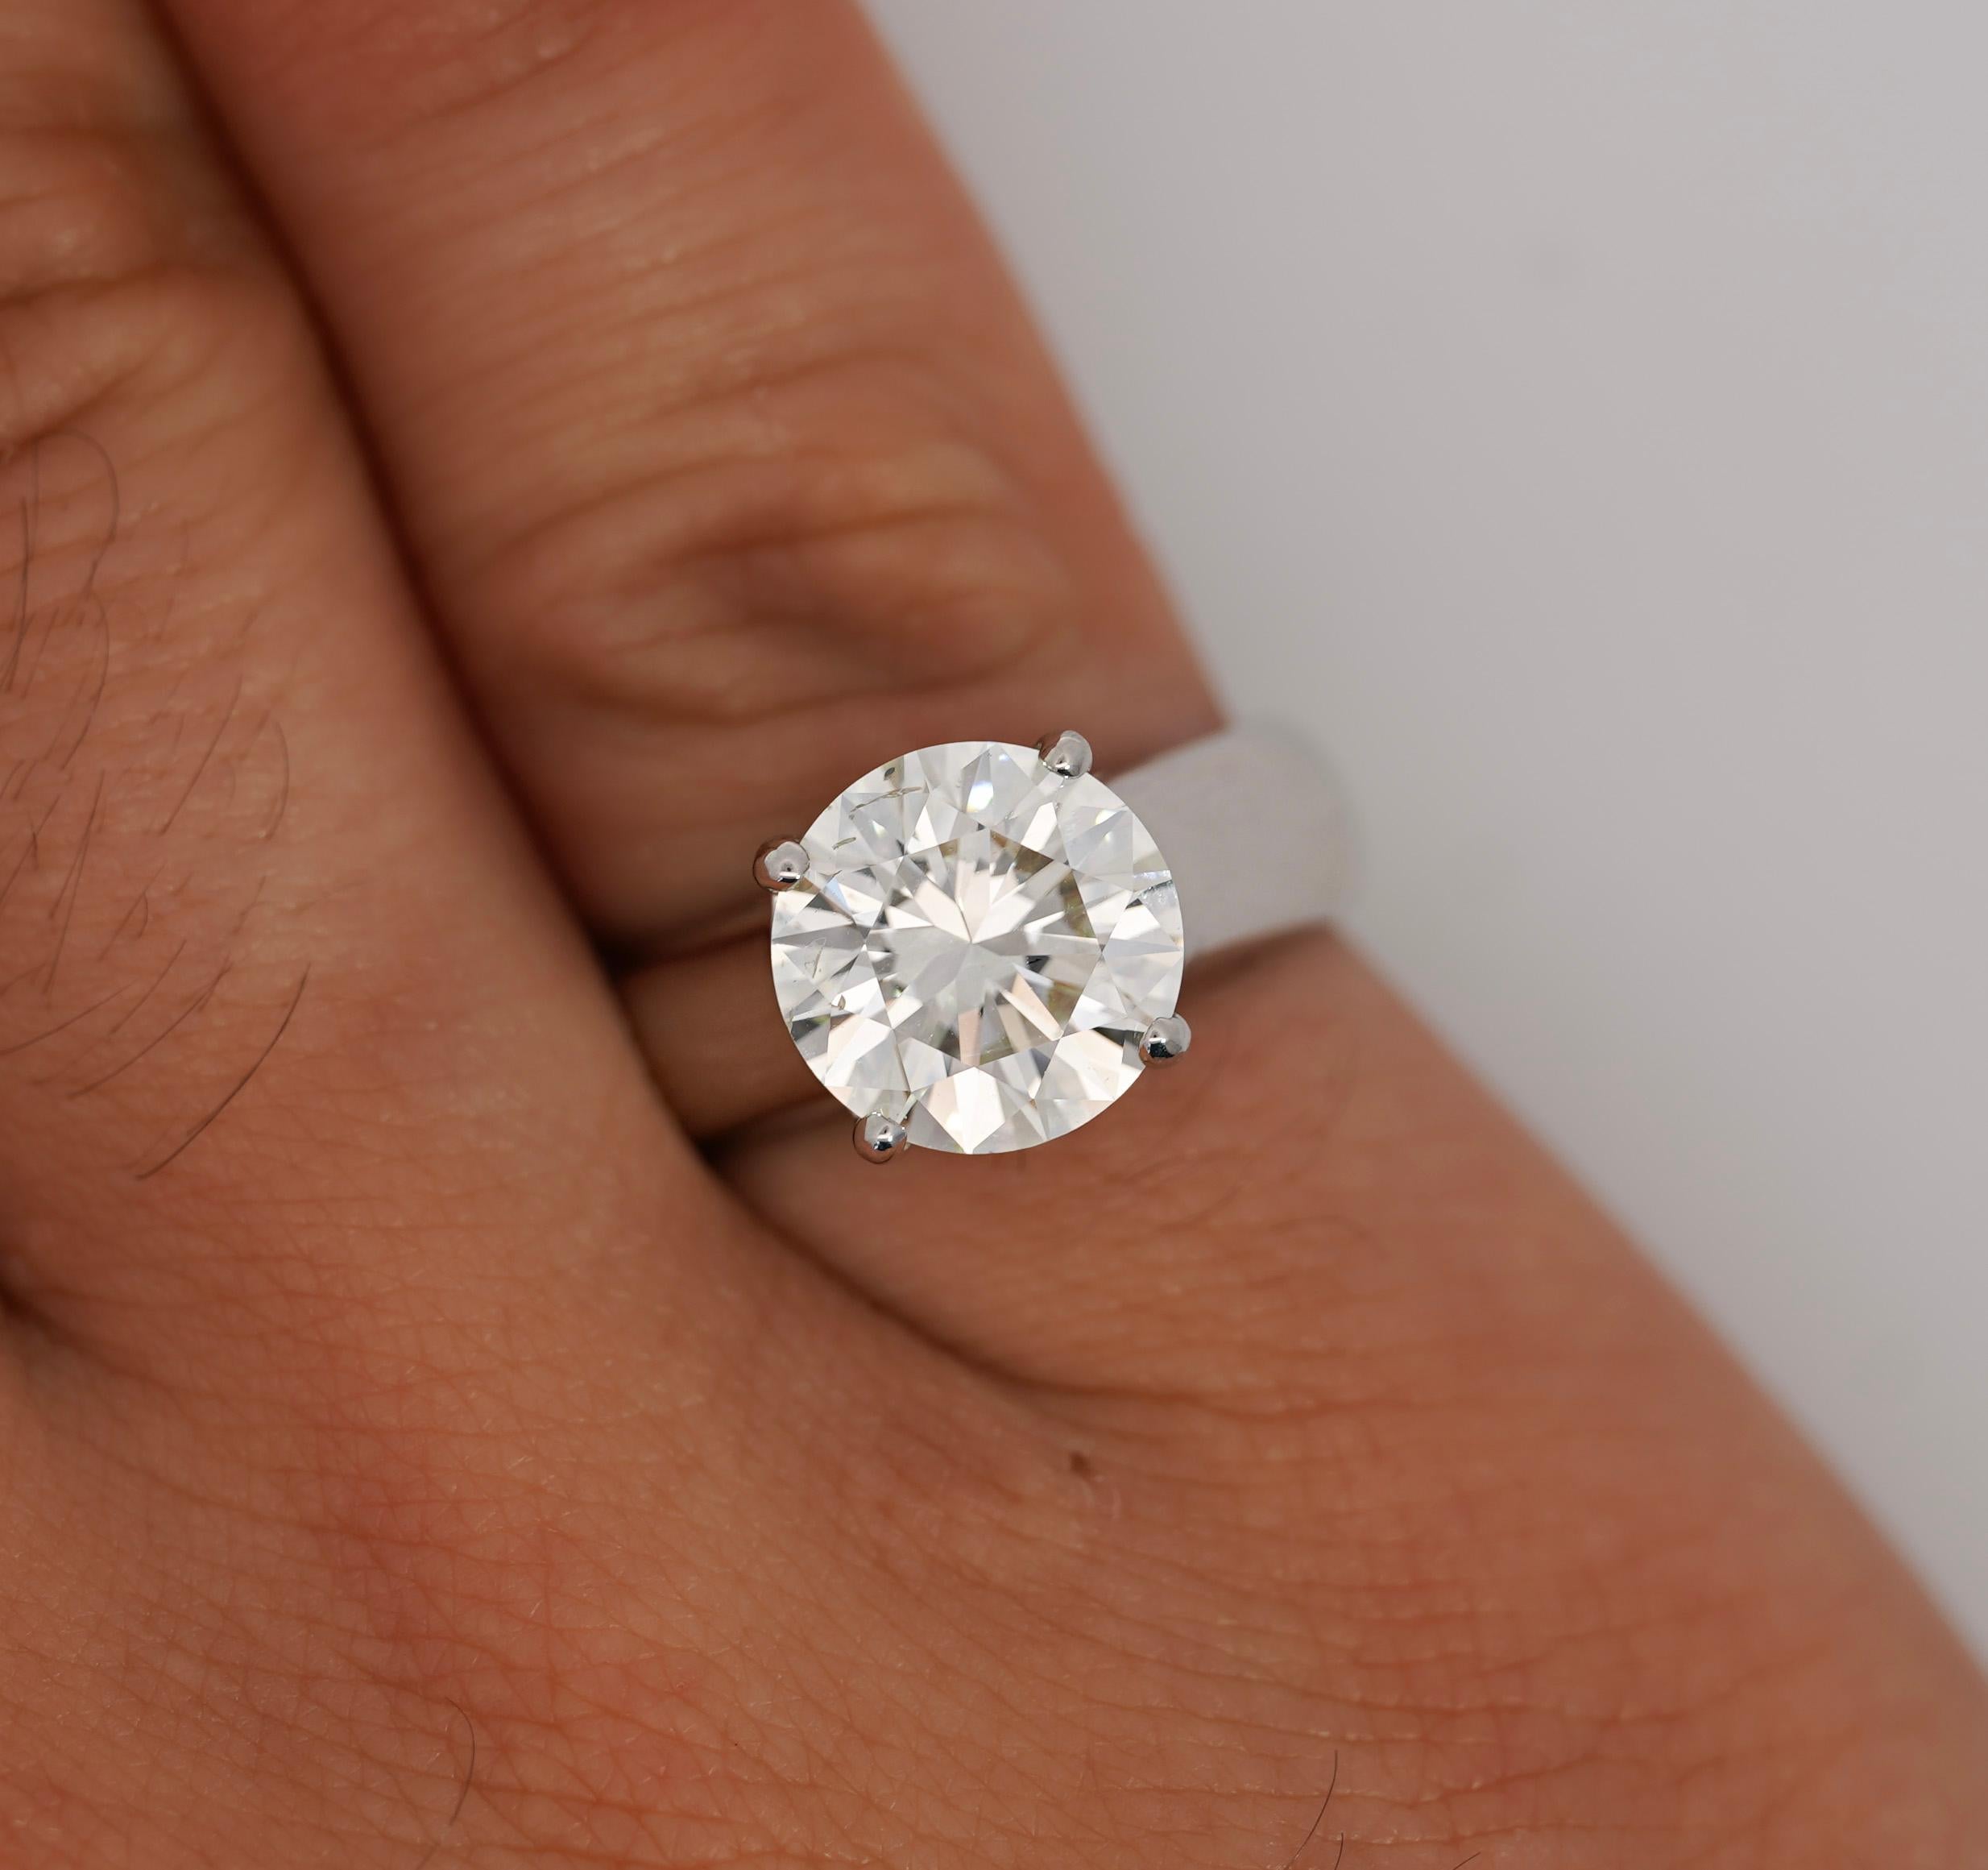 This captivating platinum solitaire ring showcases a stunning 4.07 carat round brilliant diamond, boasting H color and SI1 clarity. Secured in a secure 4 prong setting.

This engagement ring is for those in search of a sturdy ring with good size